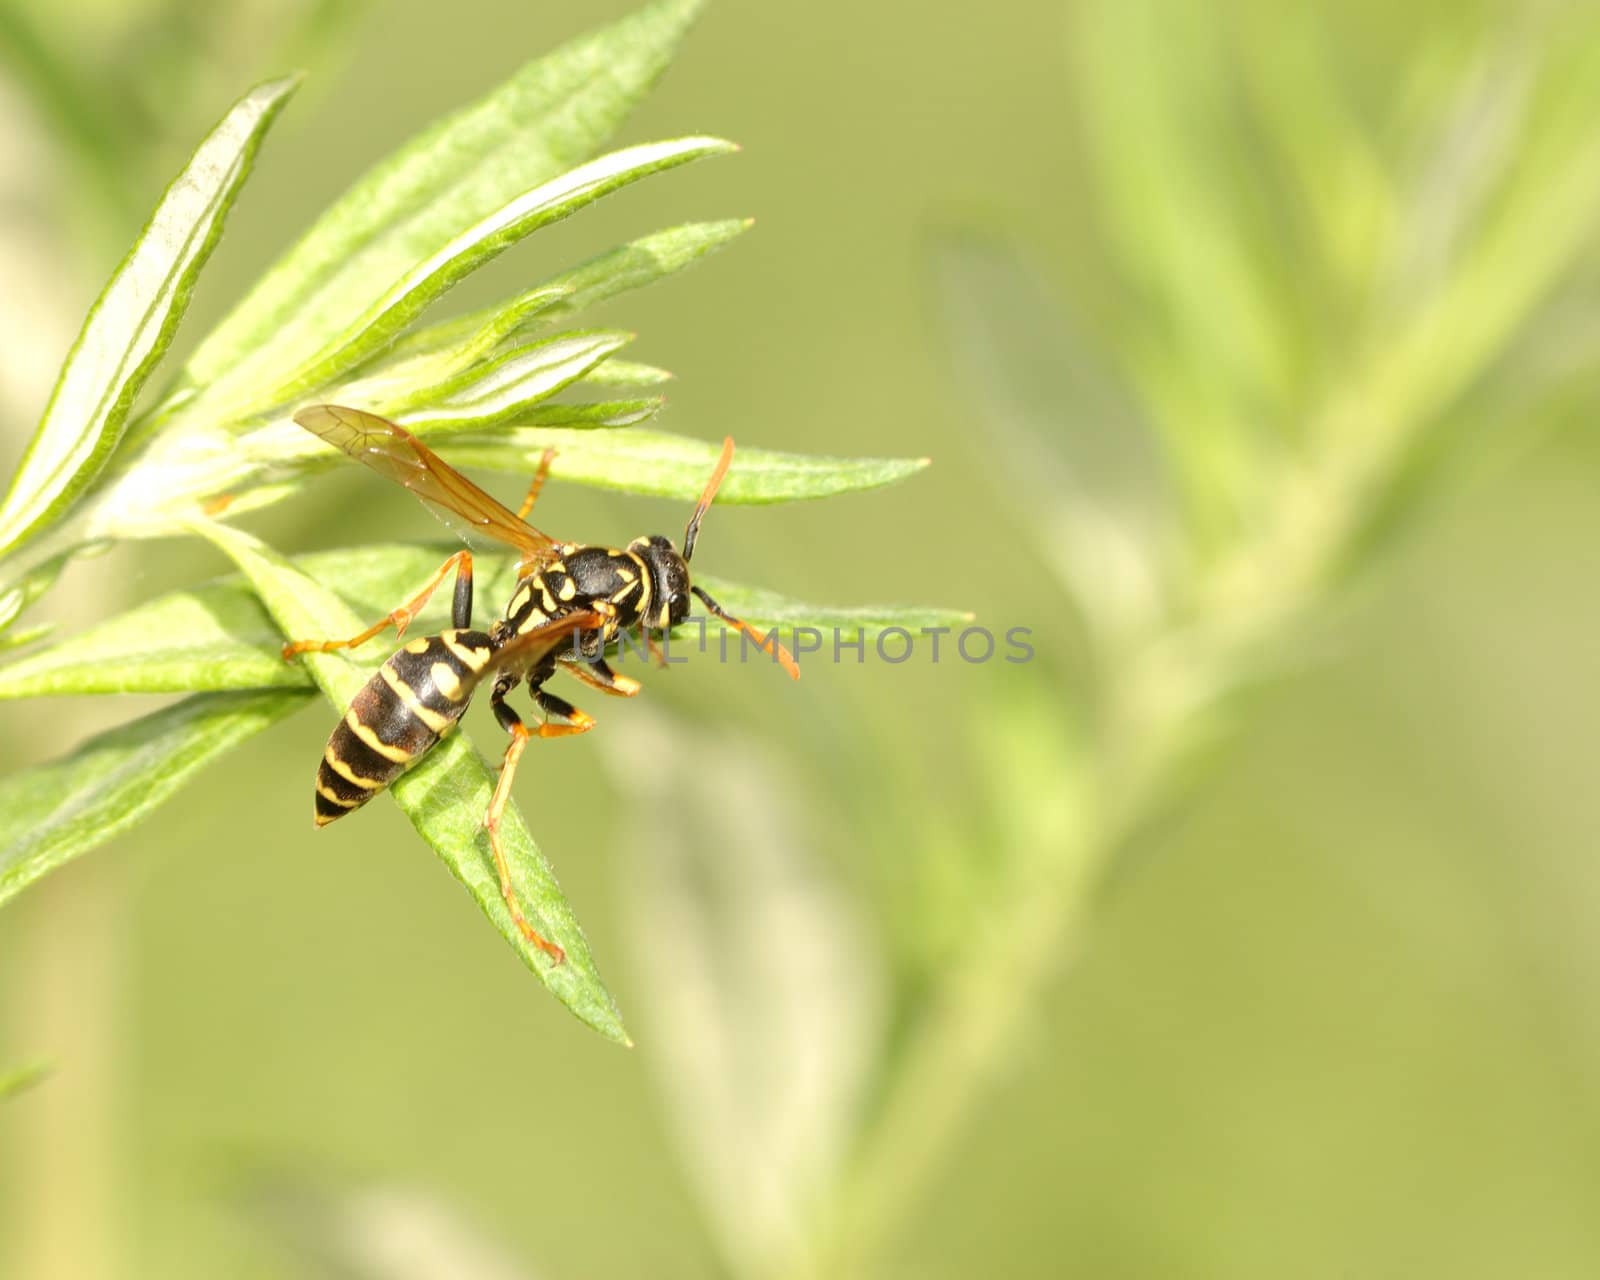 A wasp perched on top of a plant leaf.